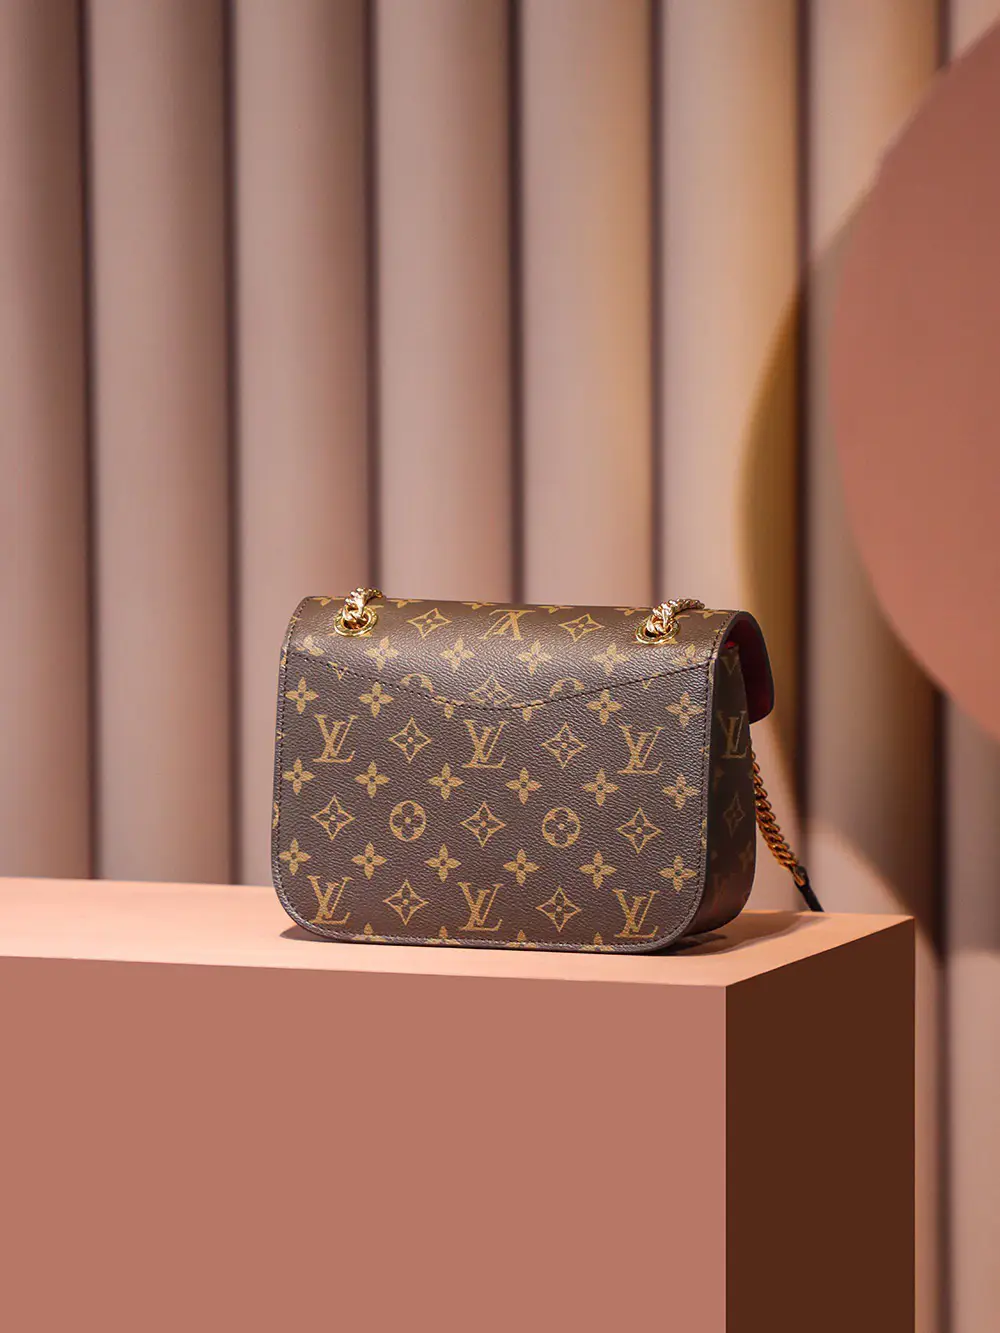 3 Louis Vuitton Mom Bags, Gallery posted by Ana Navabi